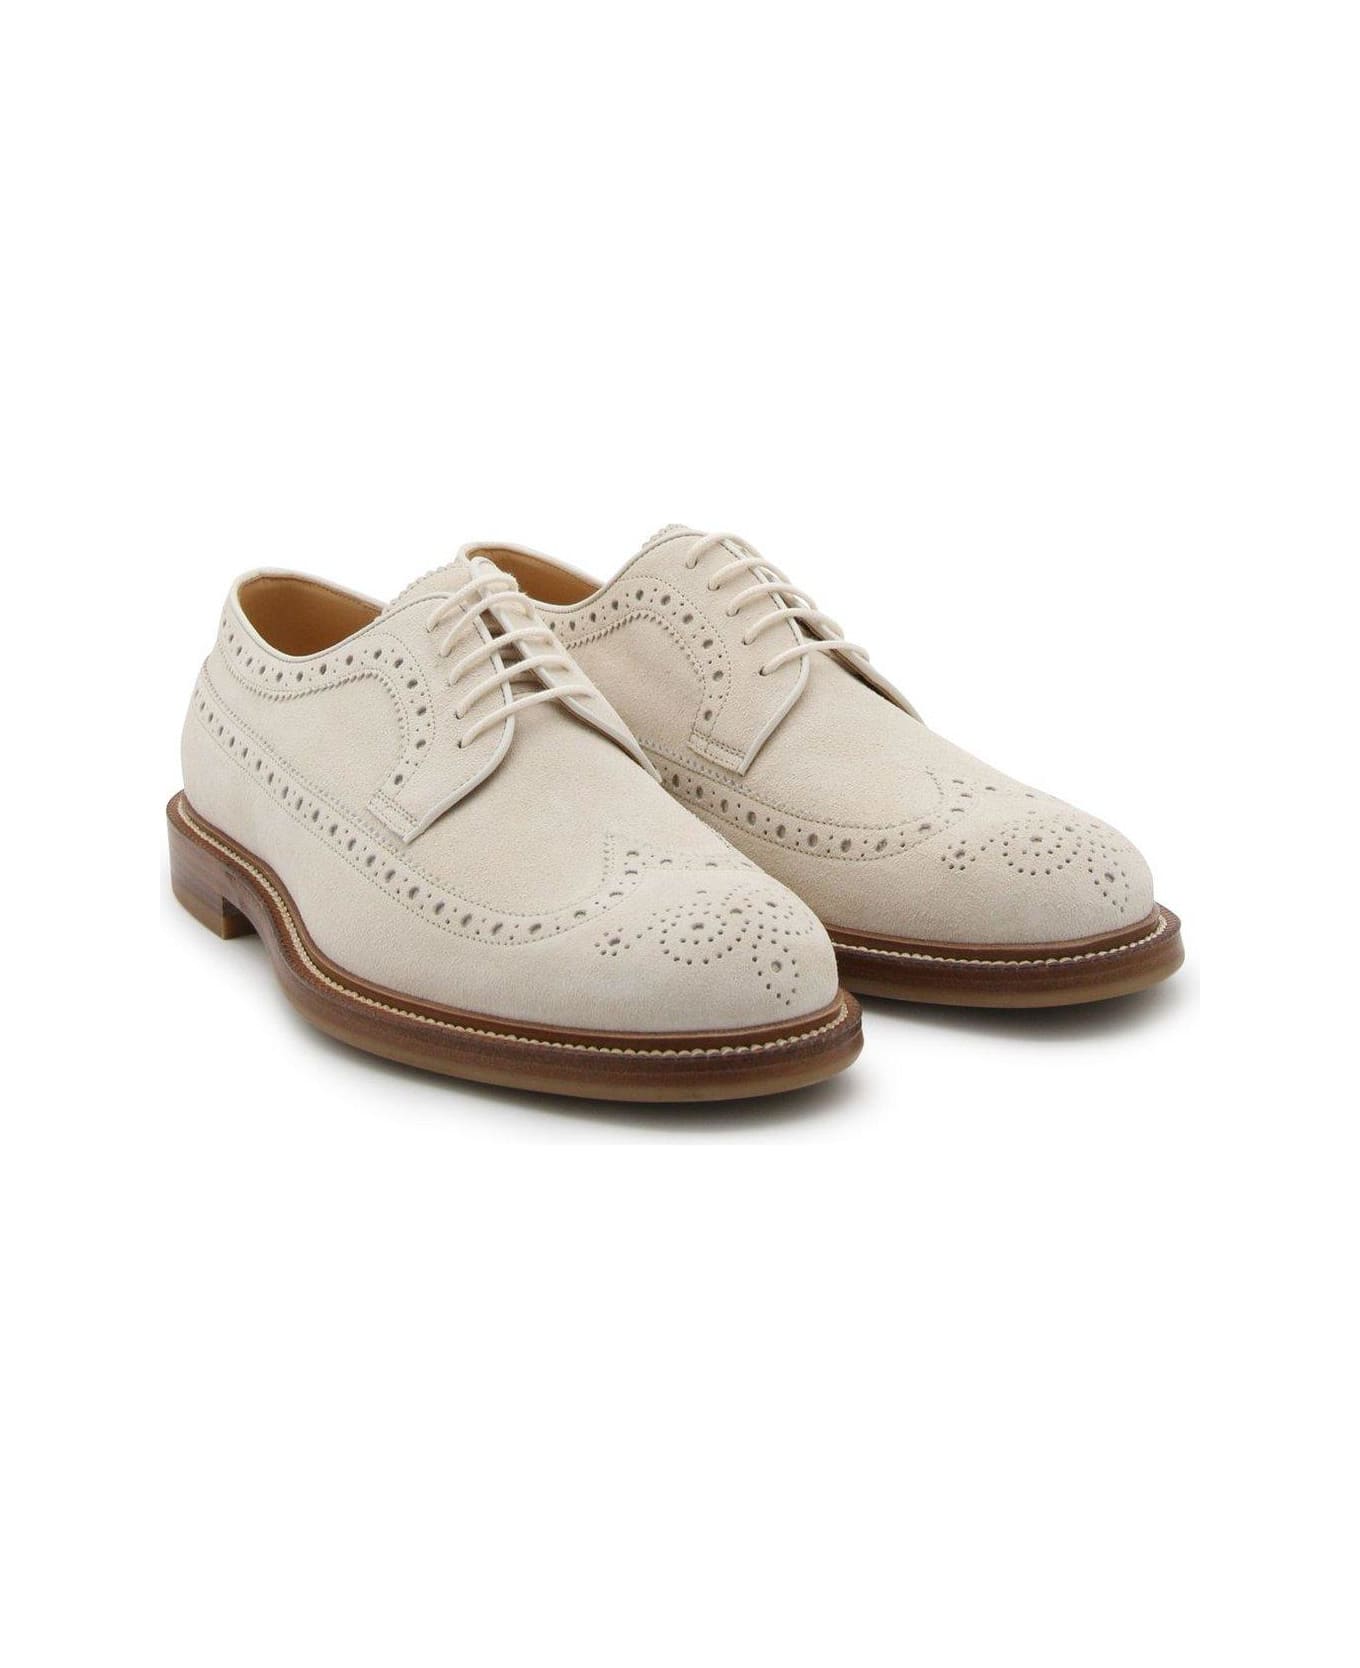 Brunello Cucinelli Perforated-embellished Lace-up Derby Shoes - White ローファー＆デッキシューズ